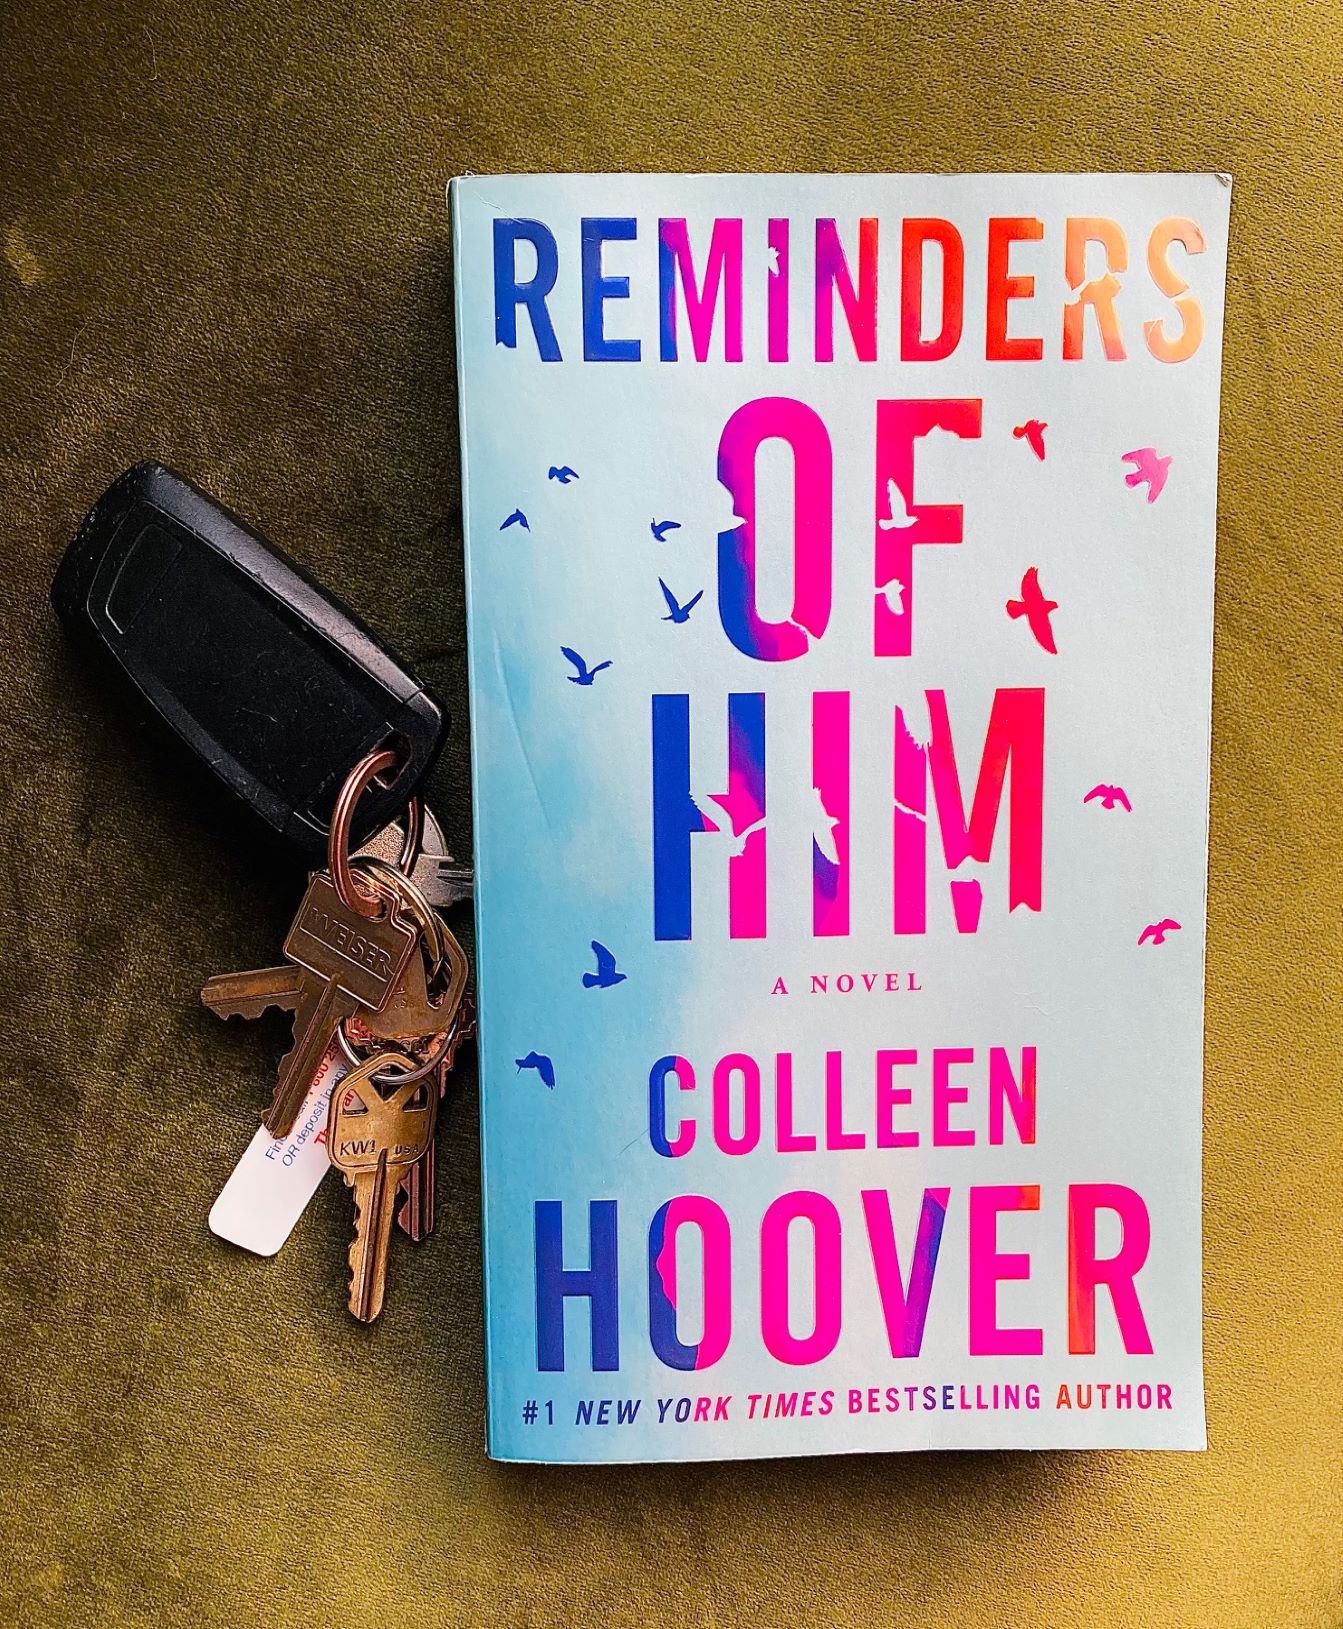 Reminders of Him by Colleen Hoover book with keys behind it